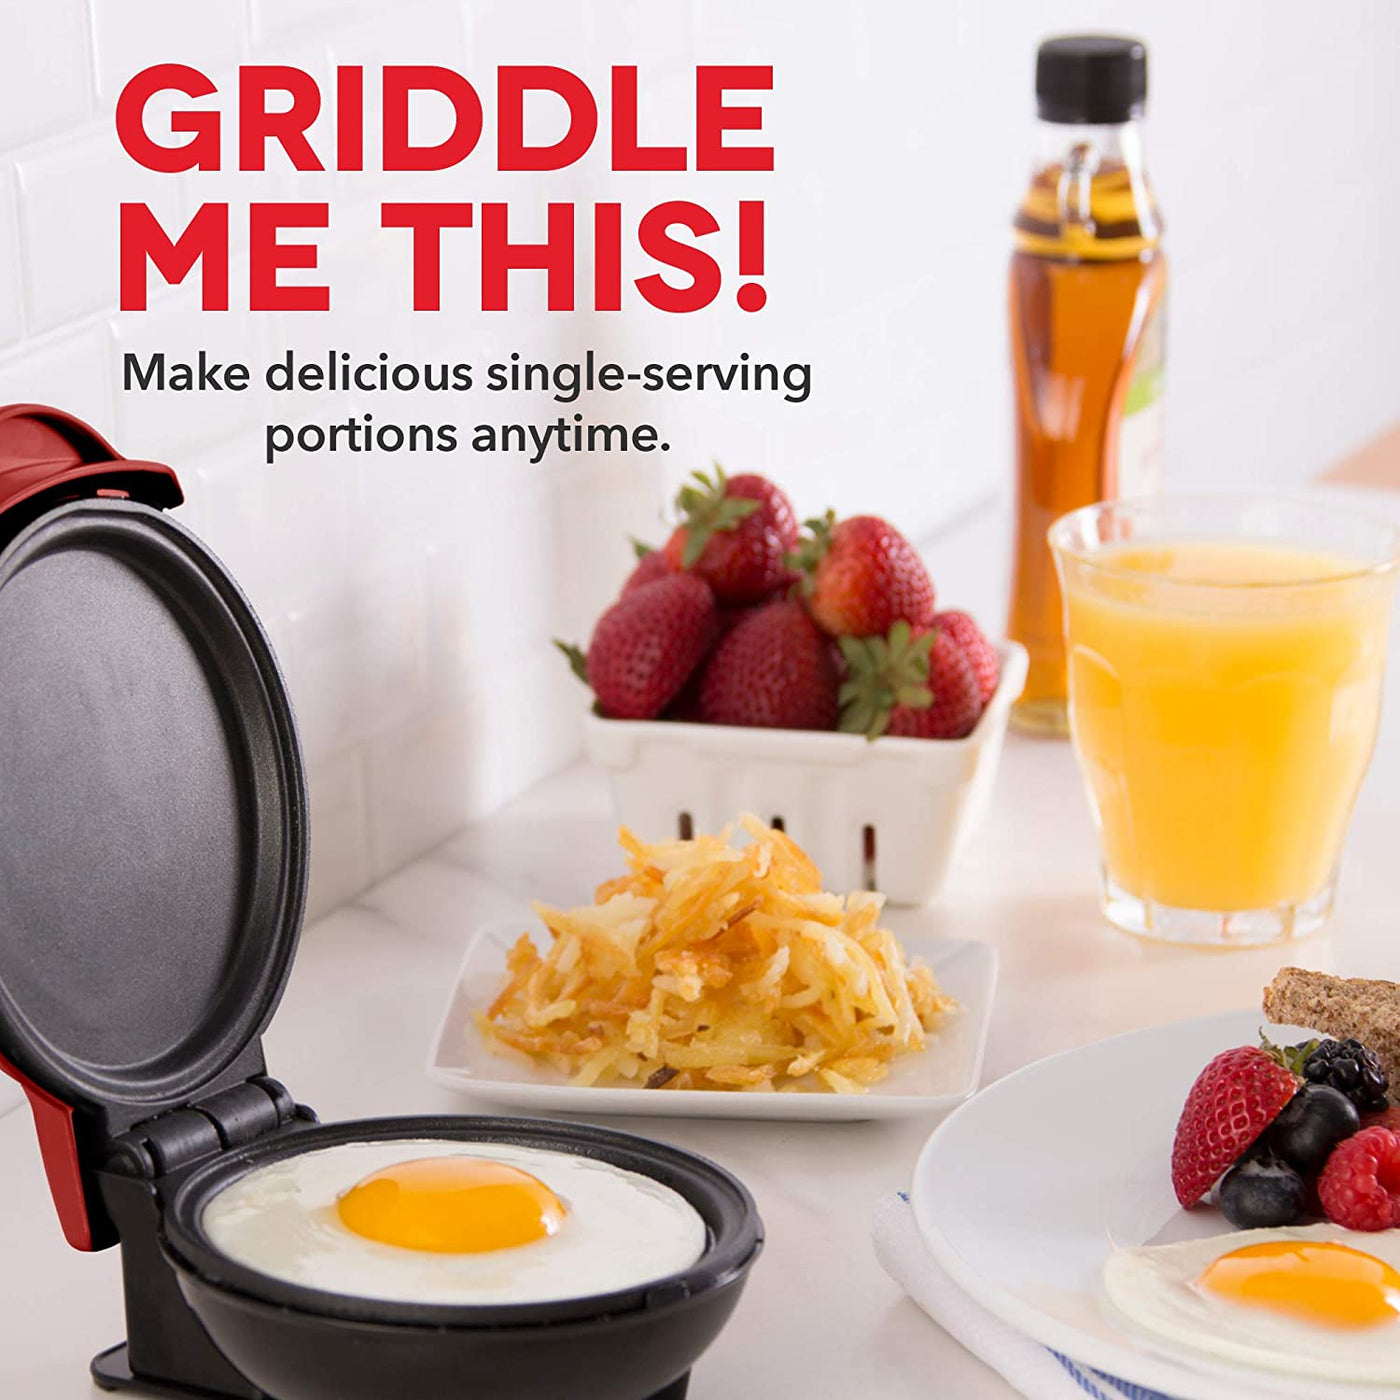 Dash DMS001RD Mini Maker Electric Round Griddle for Individual Pancakes, Cookies, Eggs & other on the go Breakfast, Lunch & Snacks, with Indicator Light + Included Recipe Book, Red